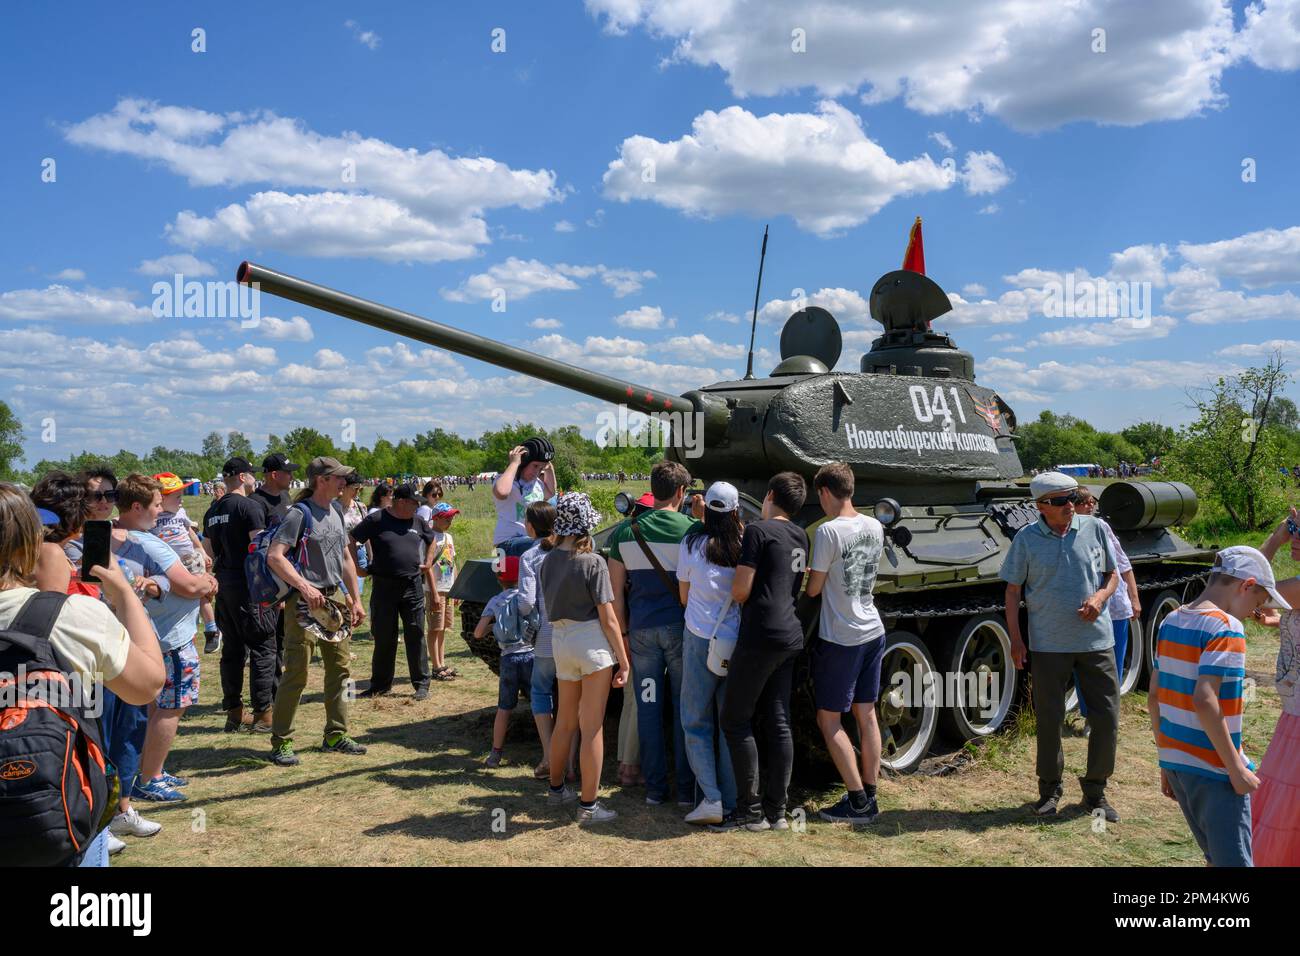 Tourists around a World War II battle tank in a forest clearing. The inscription on the tank: 'Novosibirsk farmer' Stock Photo